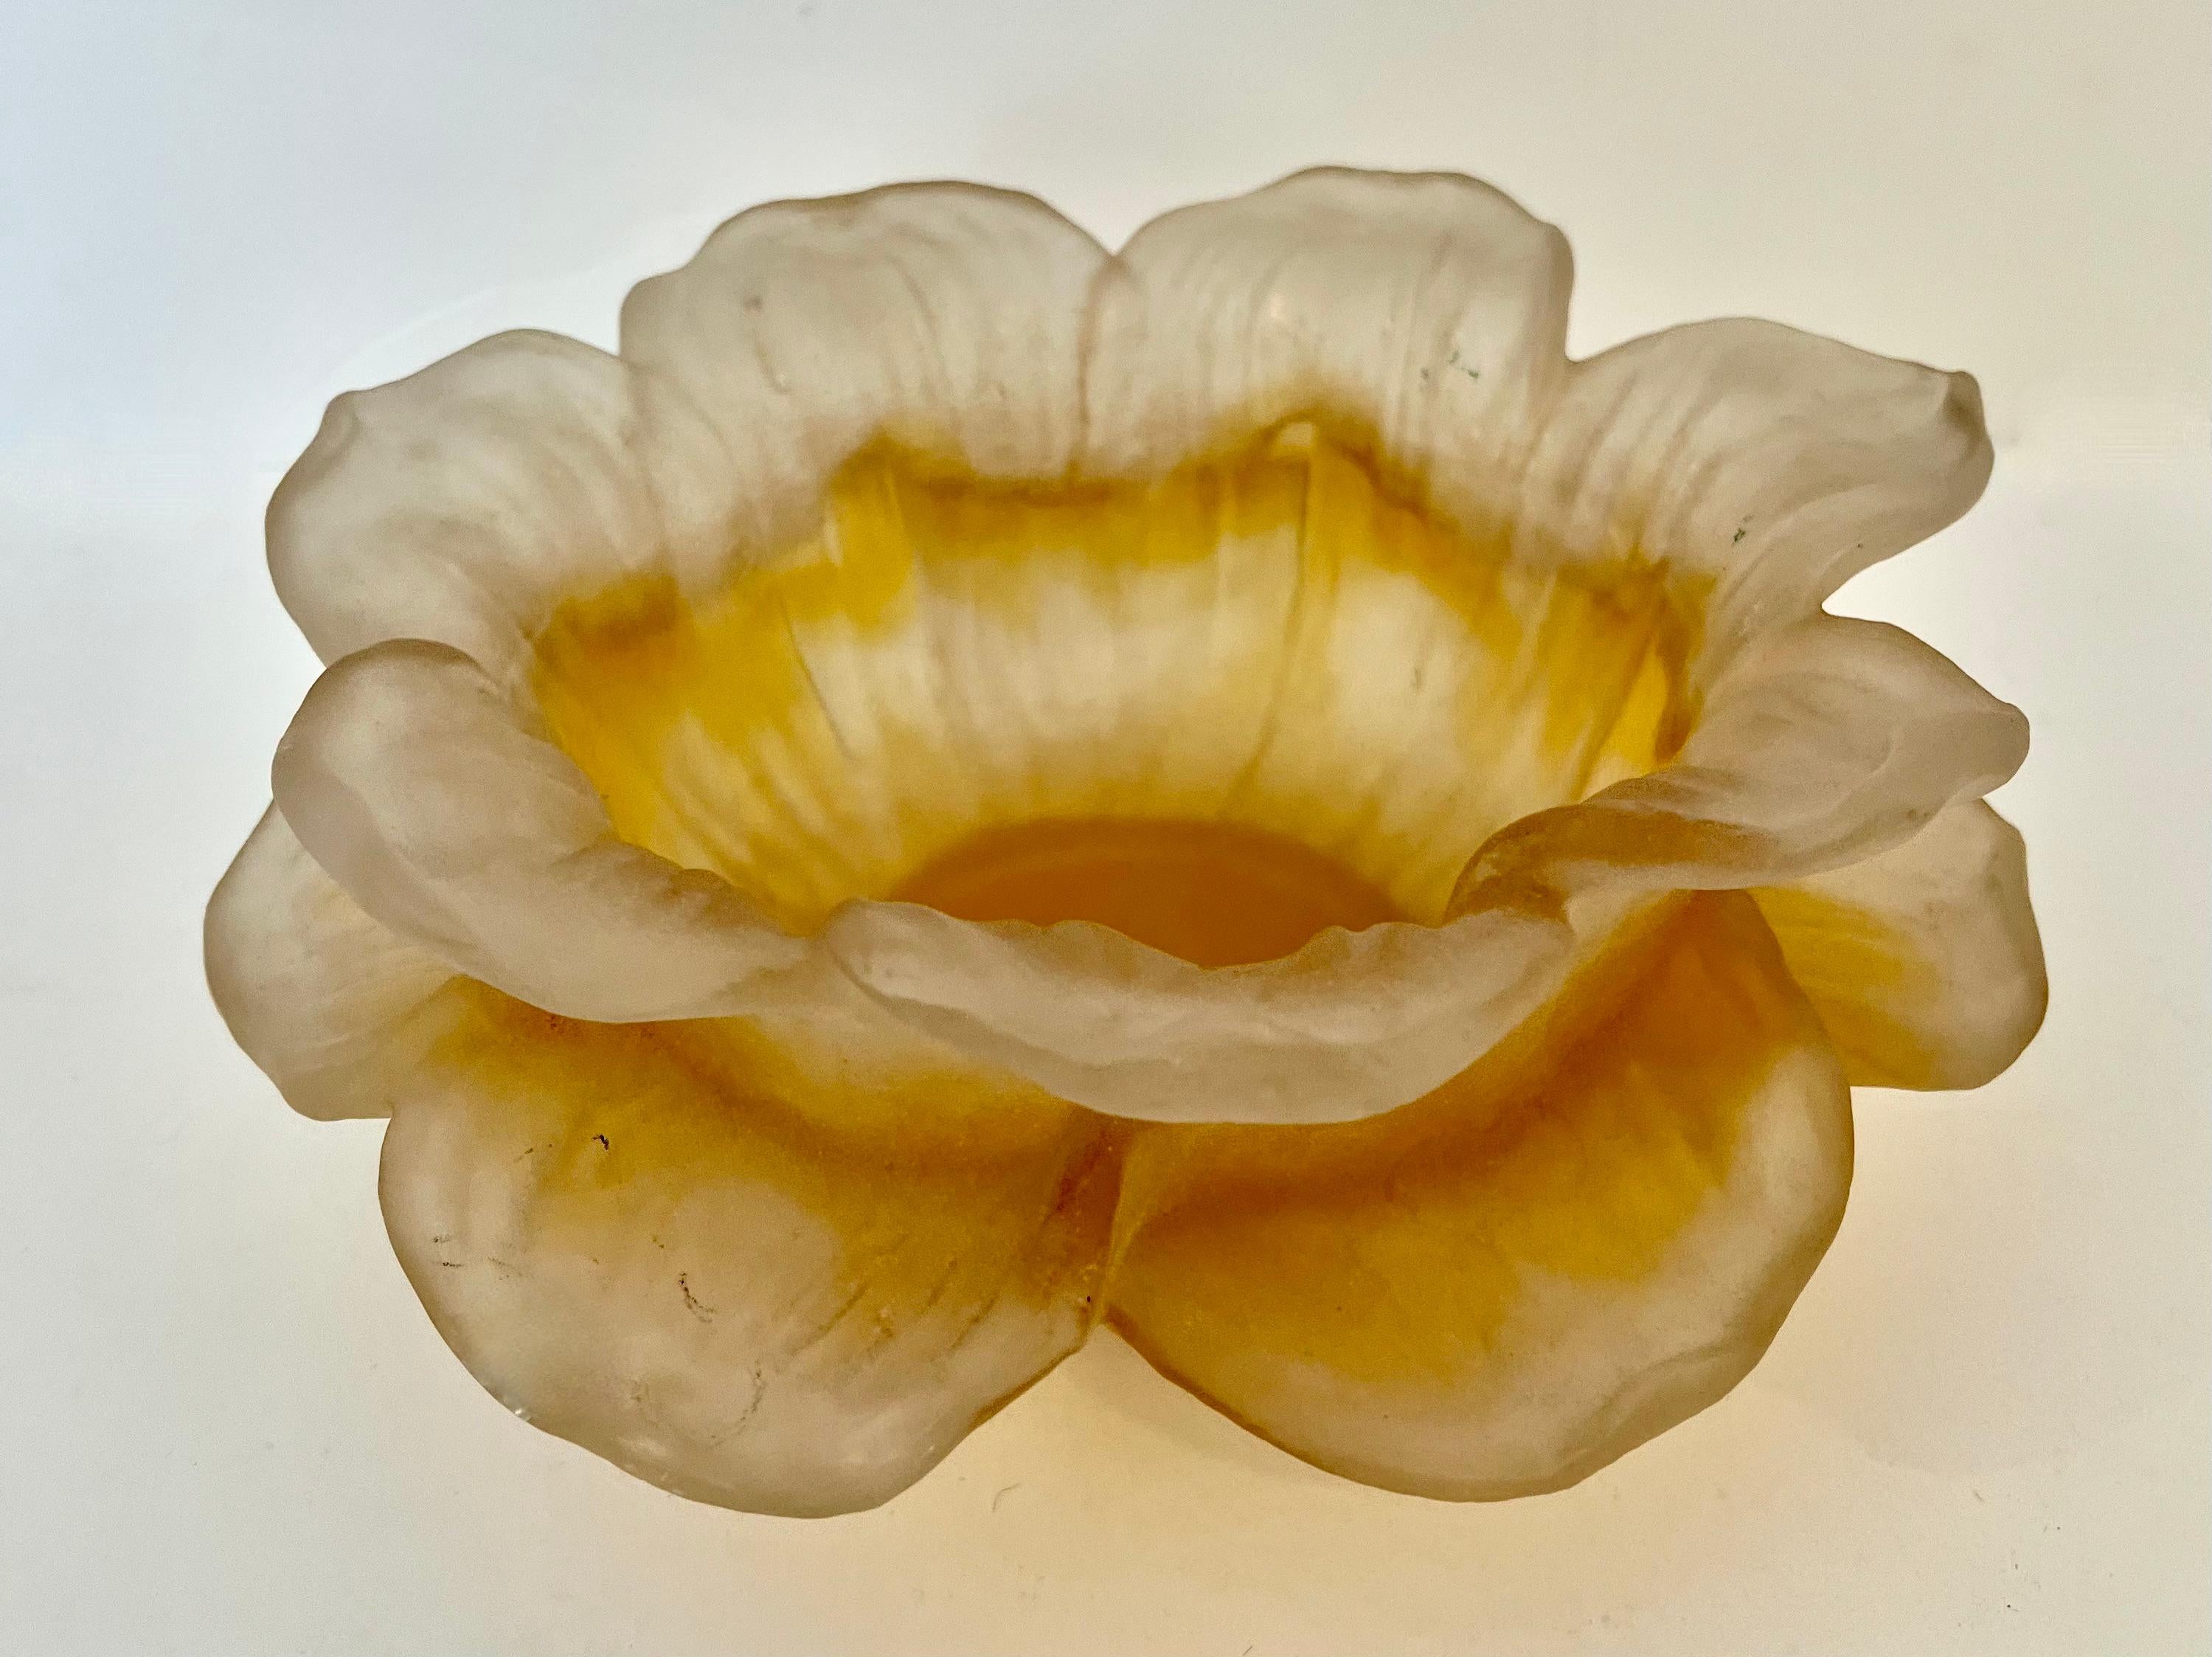 A Dorothy Thorpe resin bowl in the shape of floral petals. The colors are magnificent and very stunning the bowl could be used to serve chips or nuts, or as a decorative piece, as a sculpture of to float flowers in or a floral arrangement. The piece